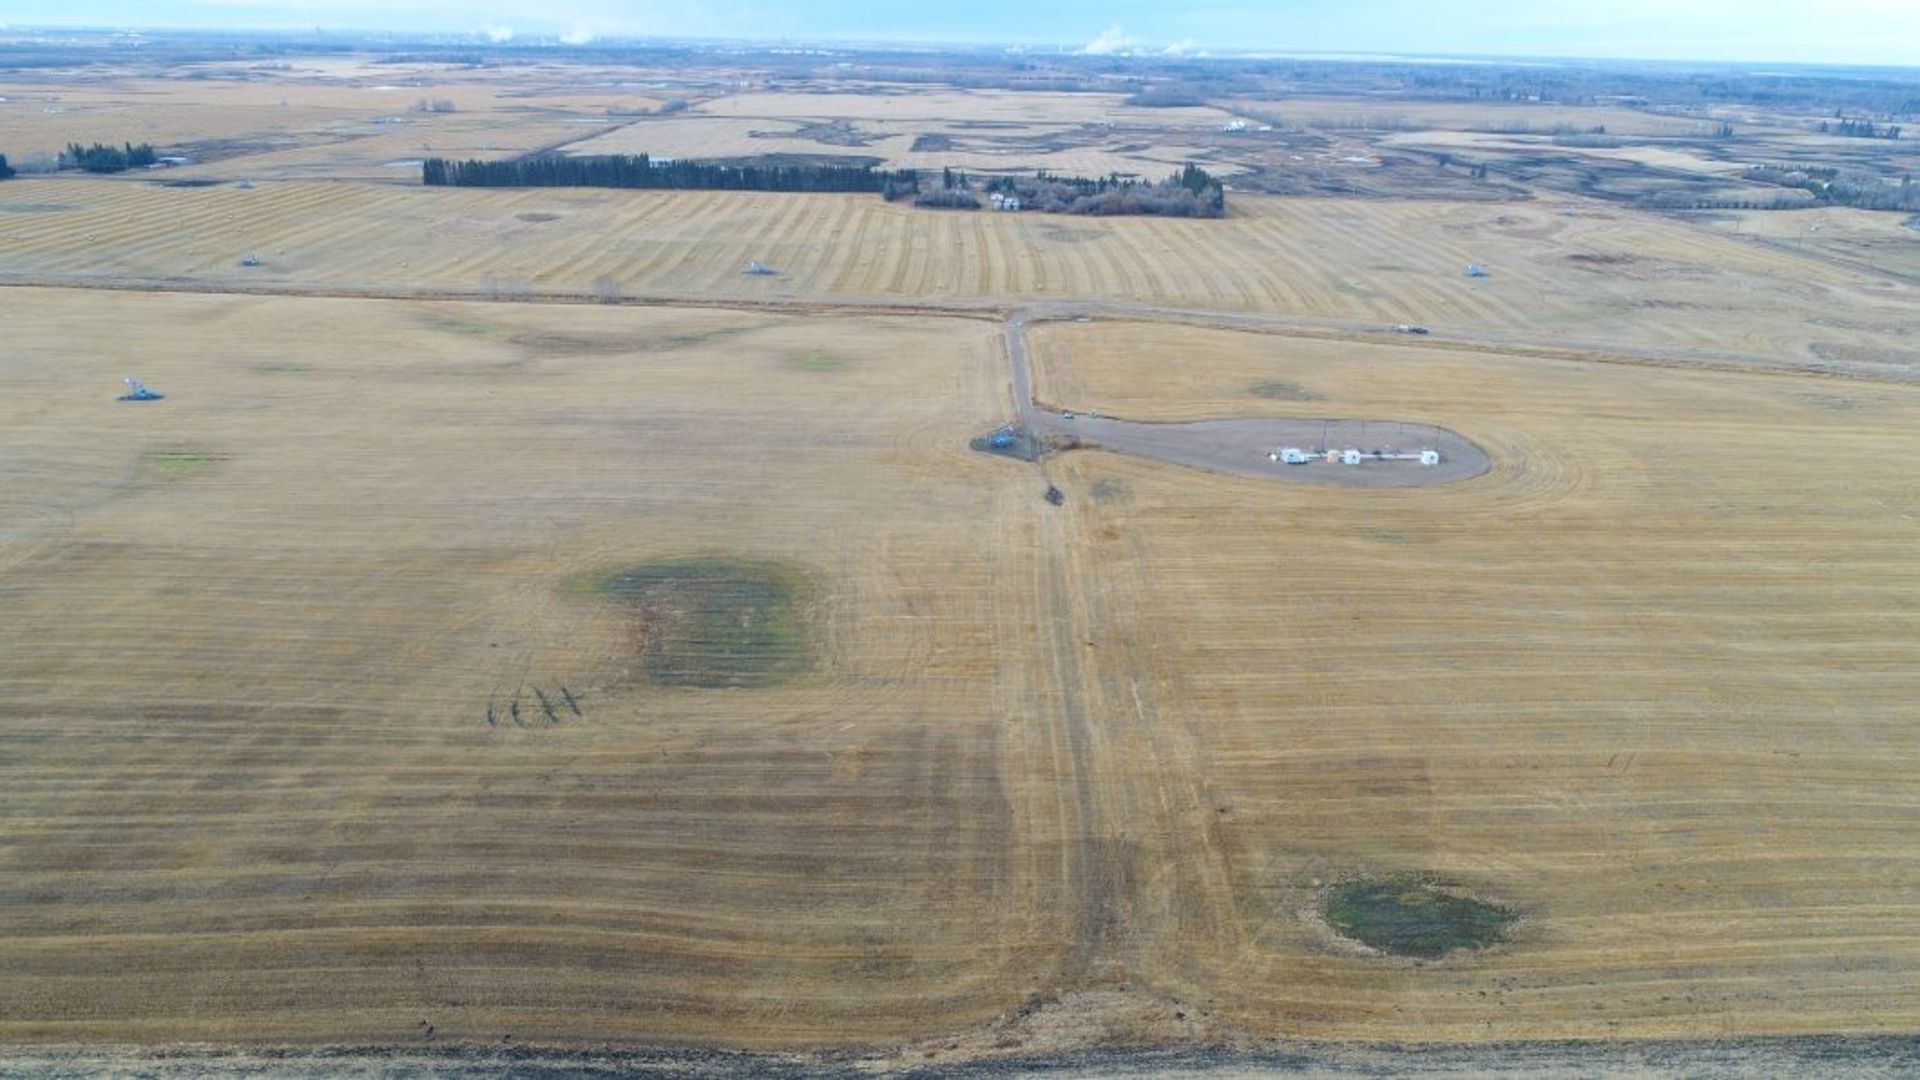 160+/- Total Acres NW 8-56-20-W4, Bruderheim, AB, consisting of Crop Land, Surface Lease & Yard Site - Image 17 of 34